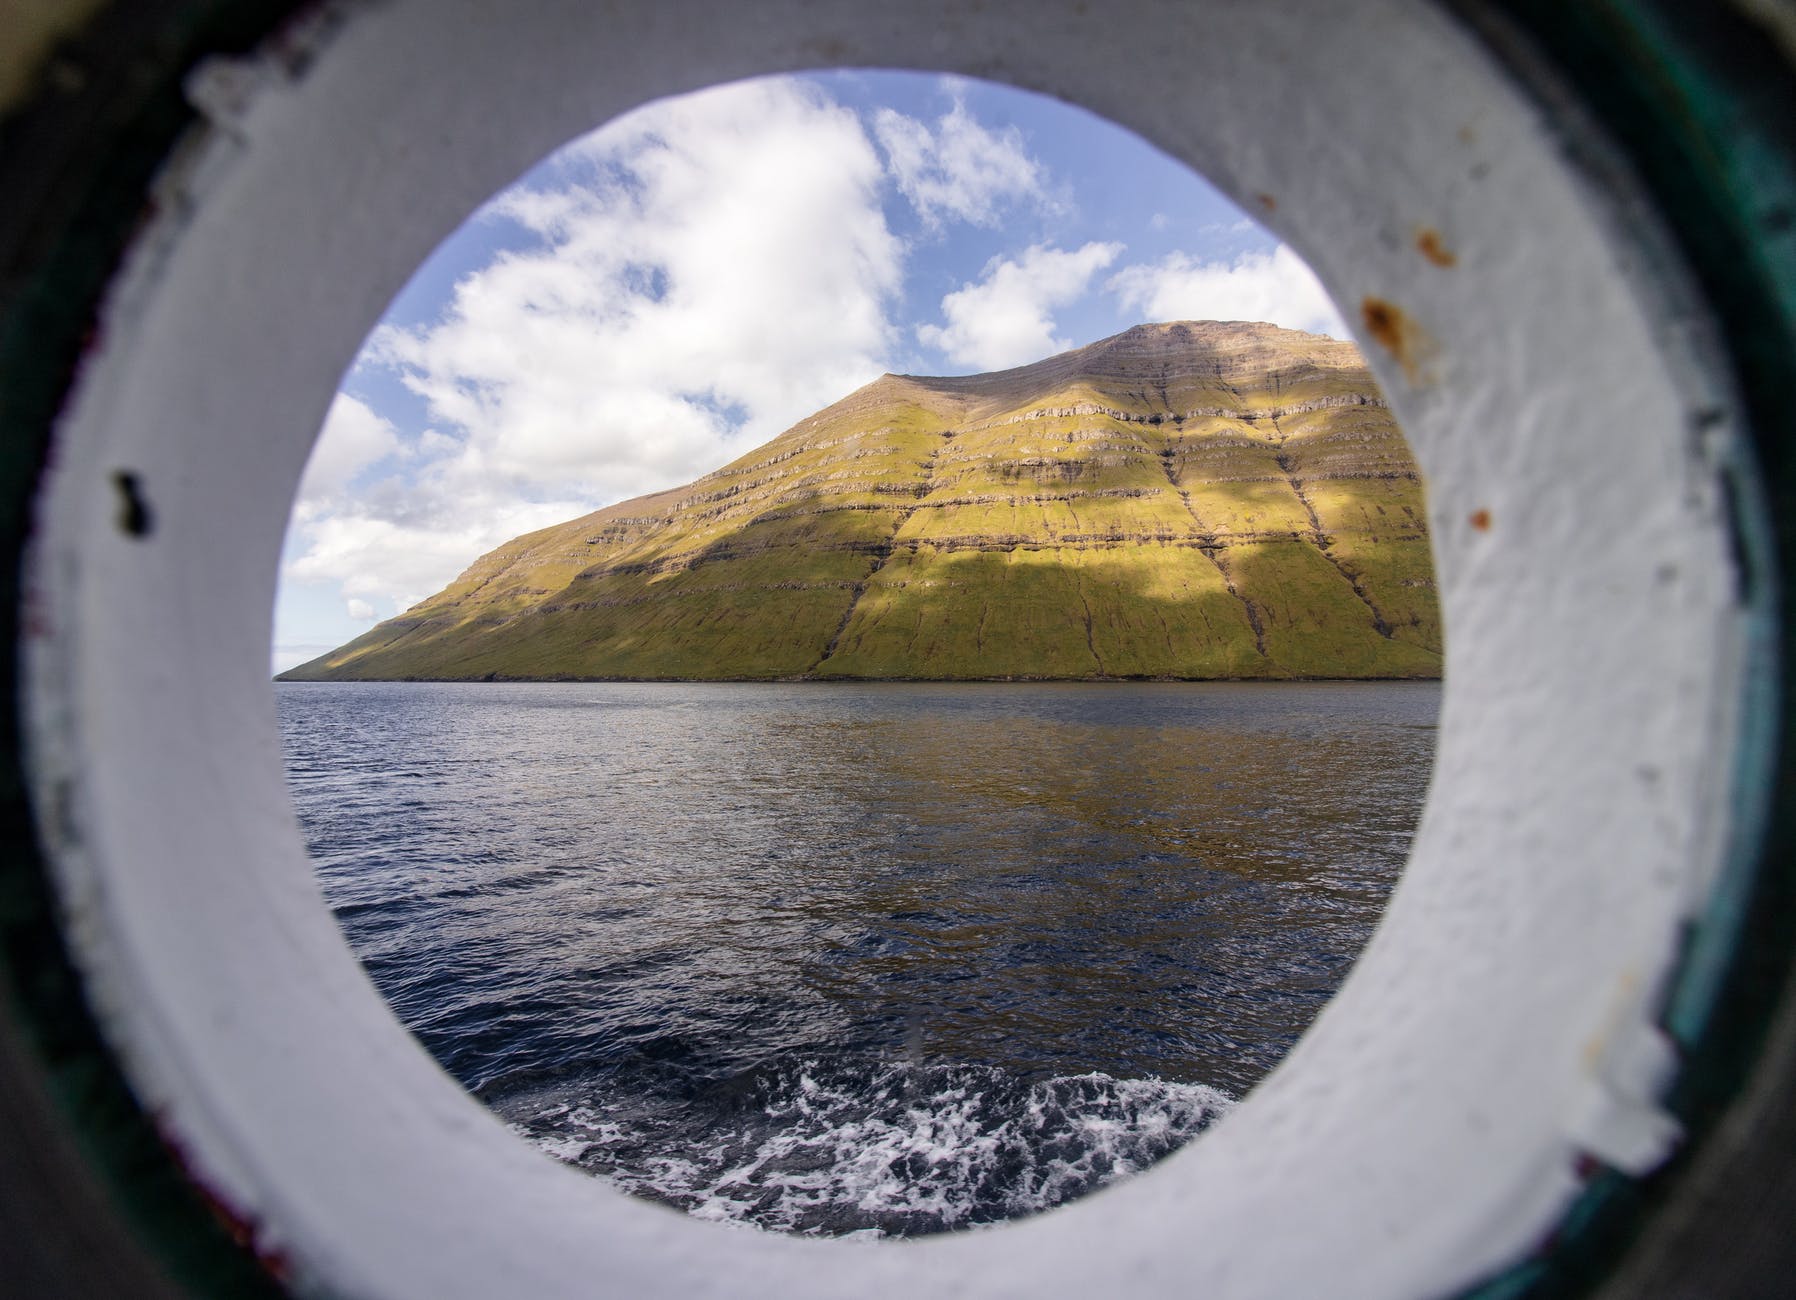 View of hills through a vessel's porthole